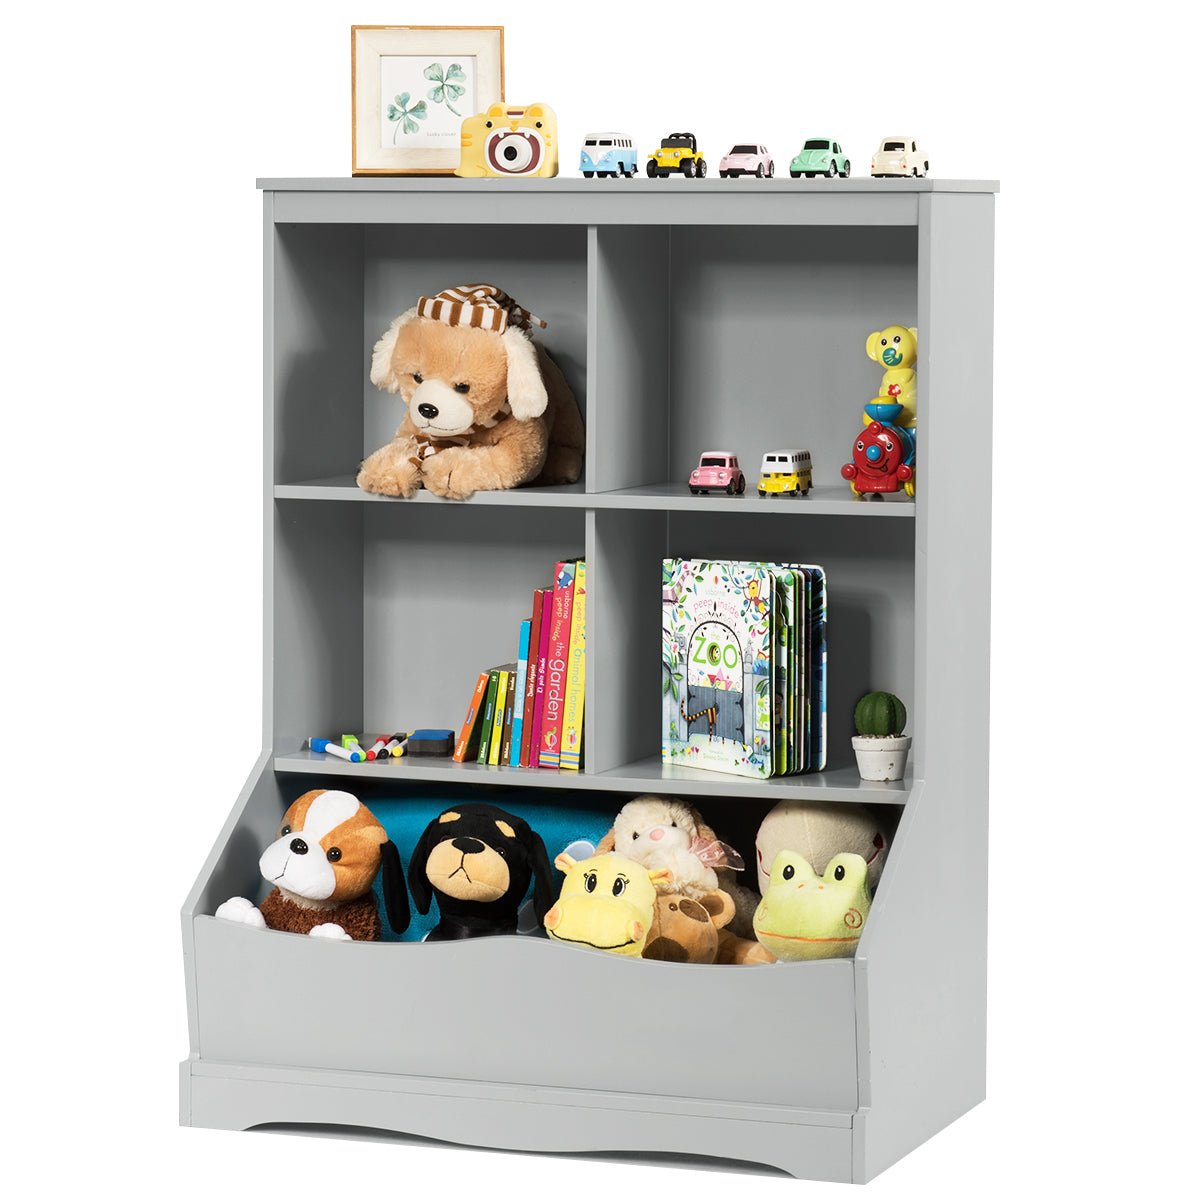 Enhance Reading with the Grey 3-Tier Wooden Bookshelf - Buy Now!